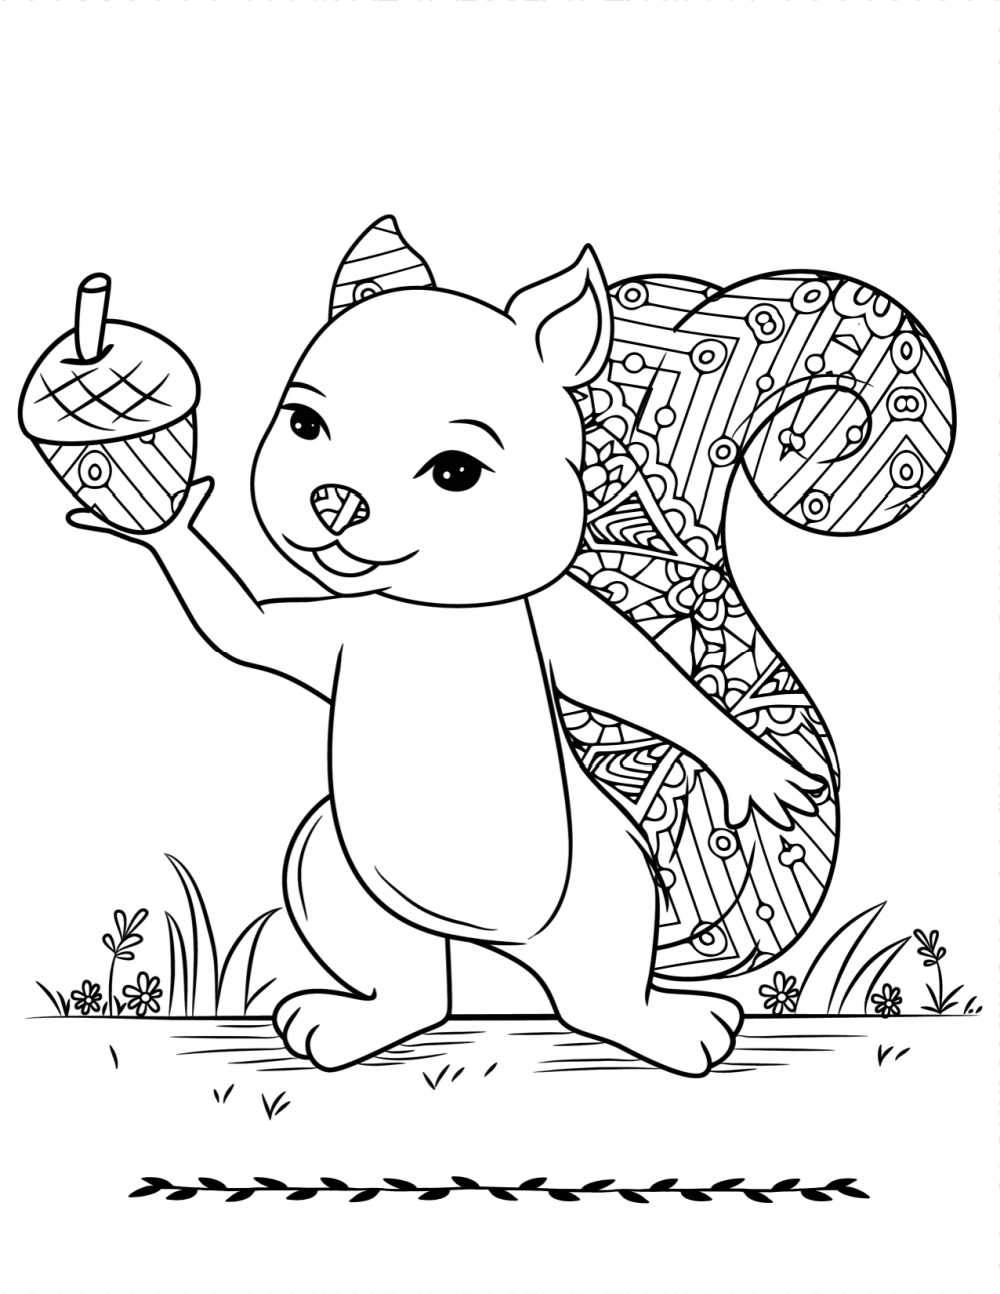 Free printable squirrel with an acorn coloring page